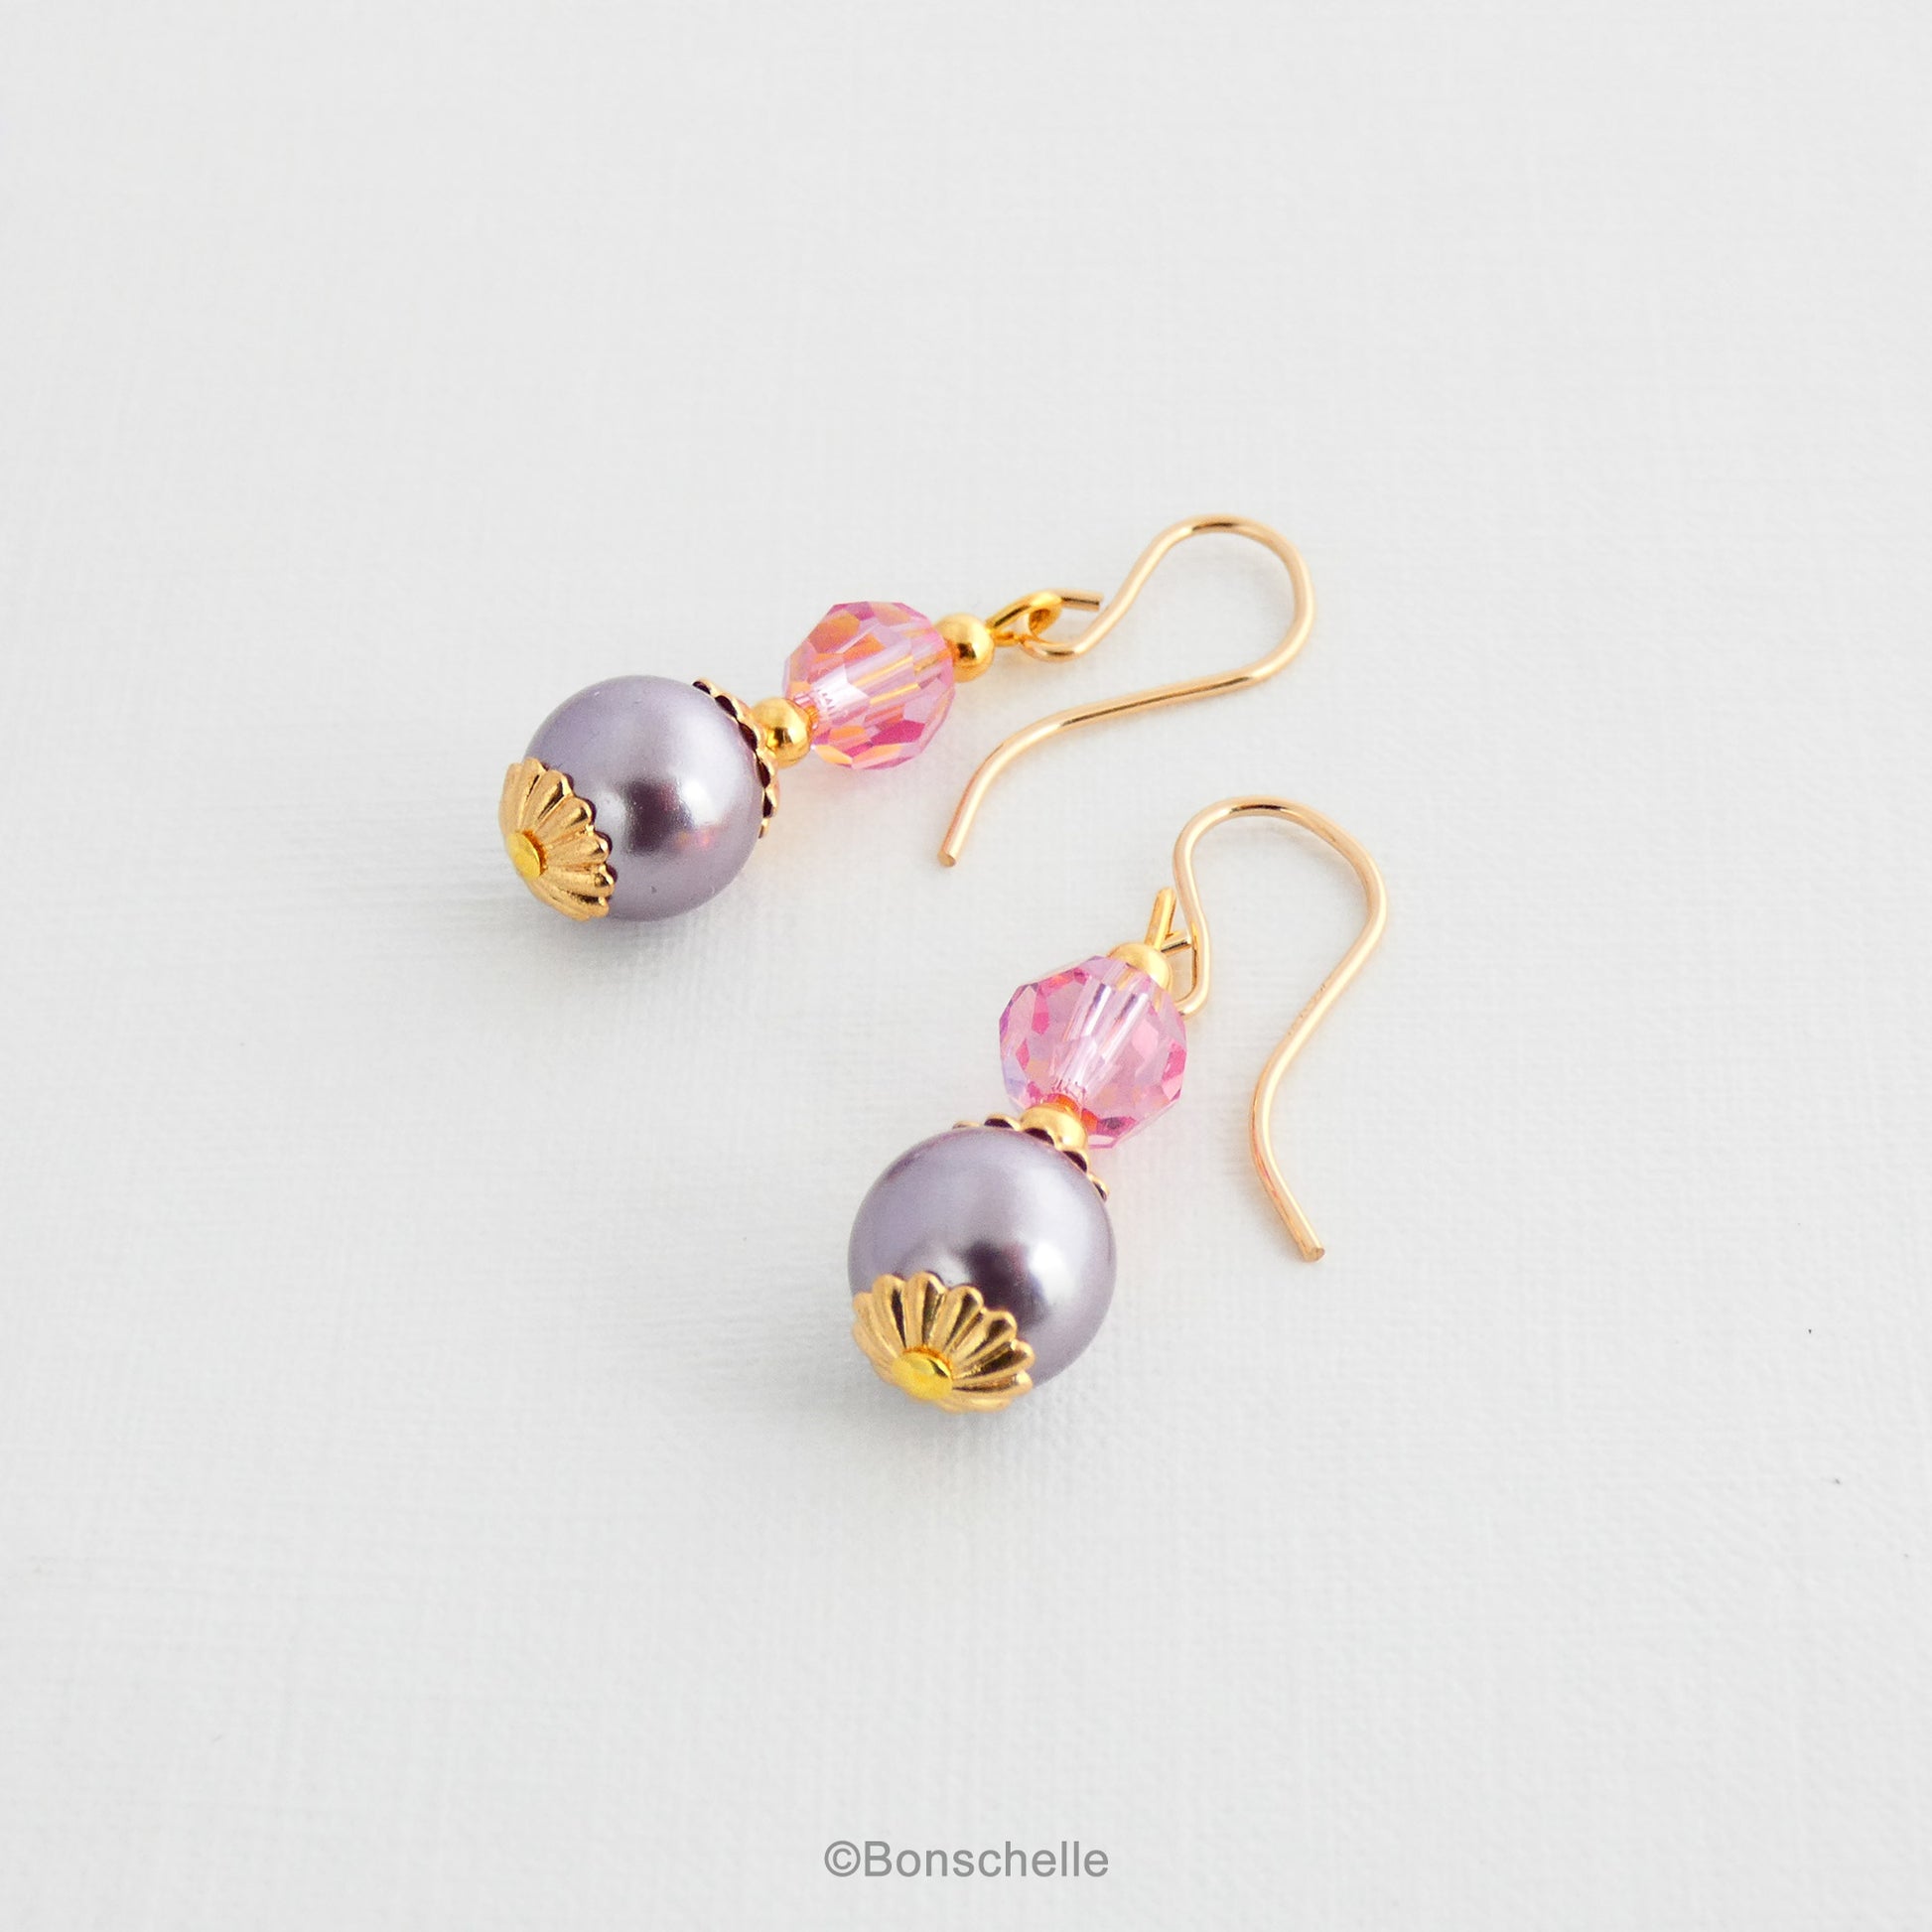 Women's pearl and crystl earrings with lilac pearls and pink crystal beads